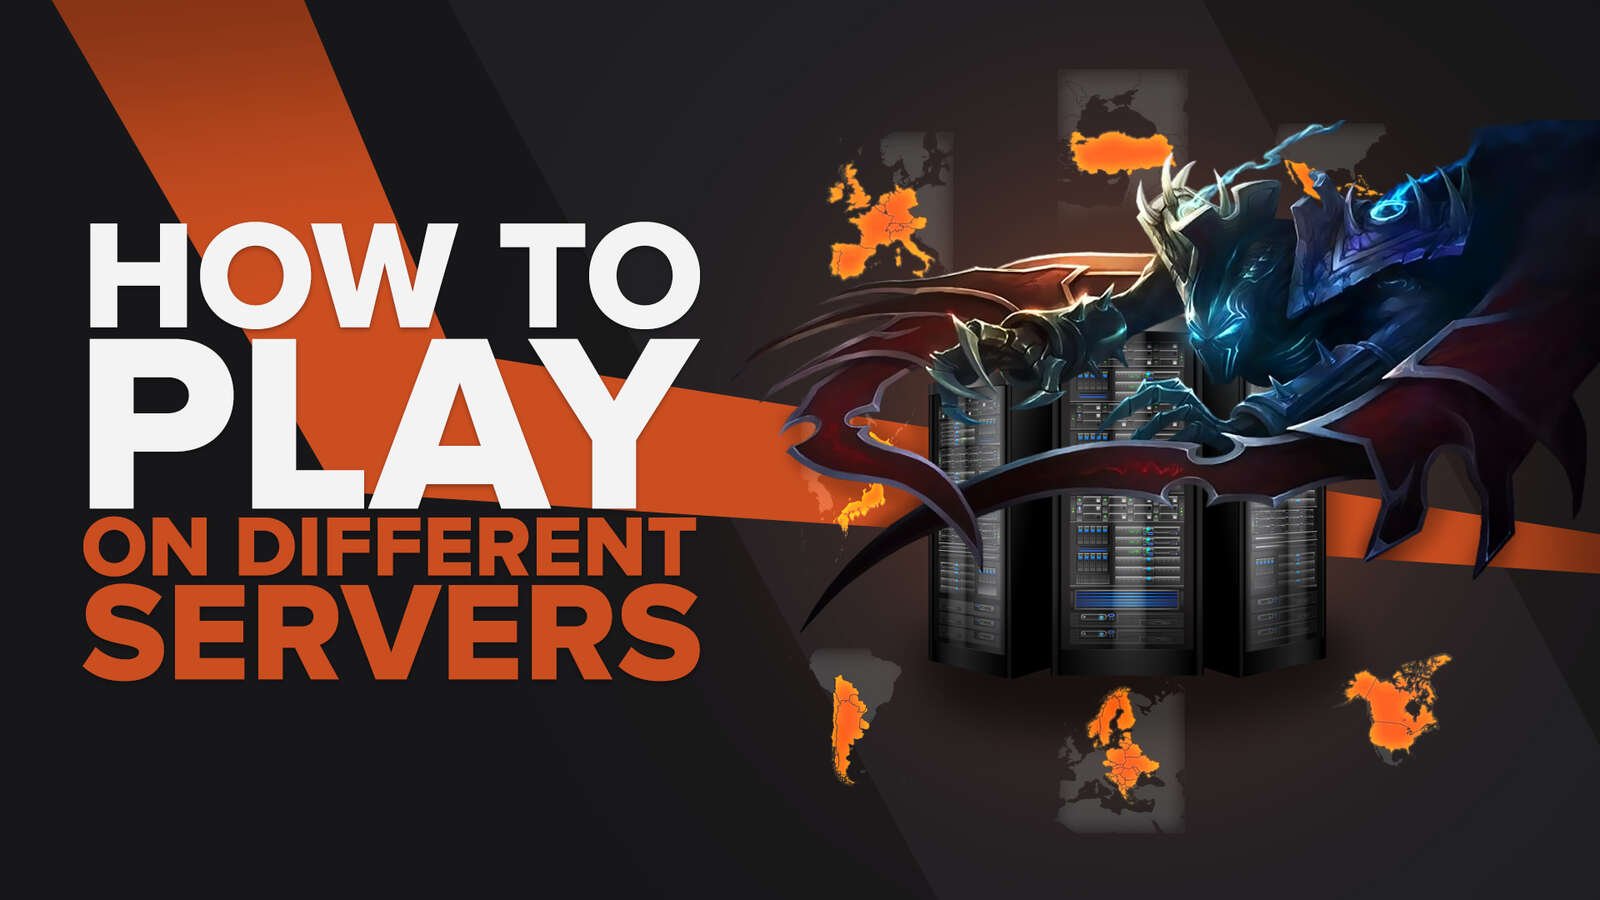 How to play on Different League of Legends Servers